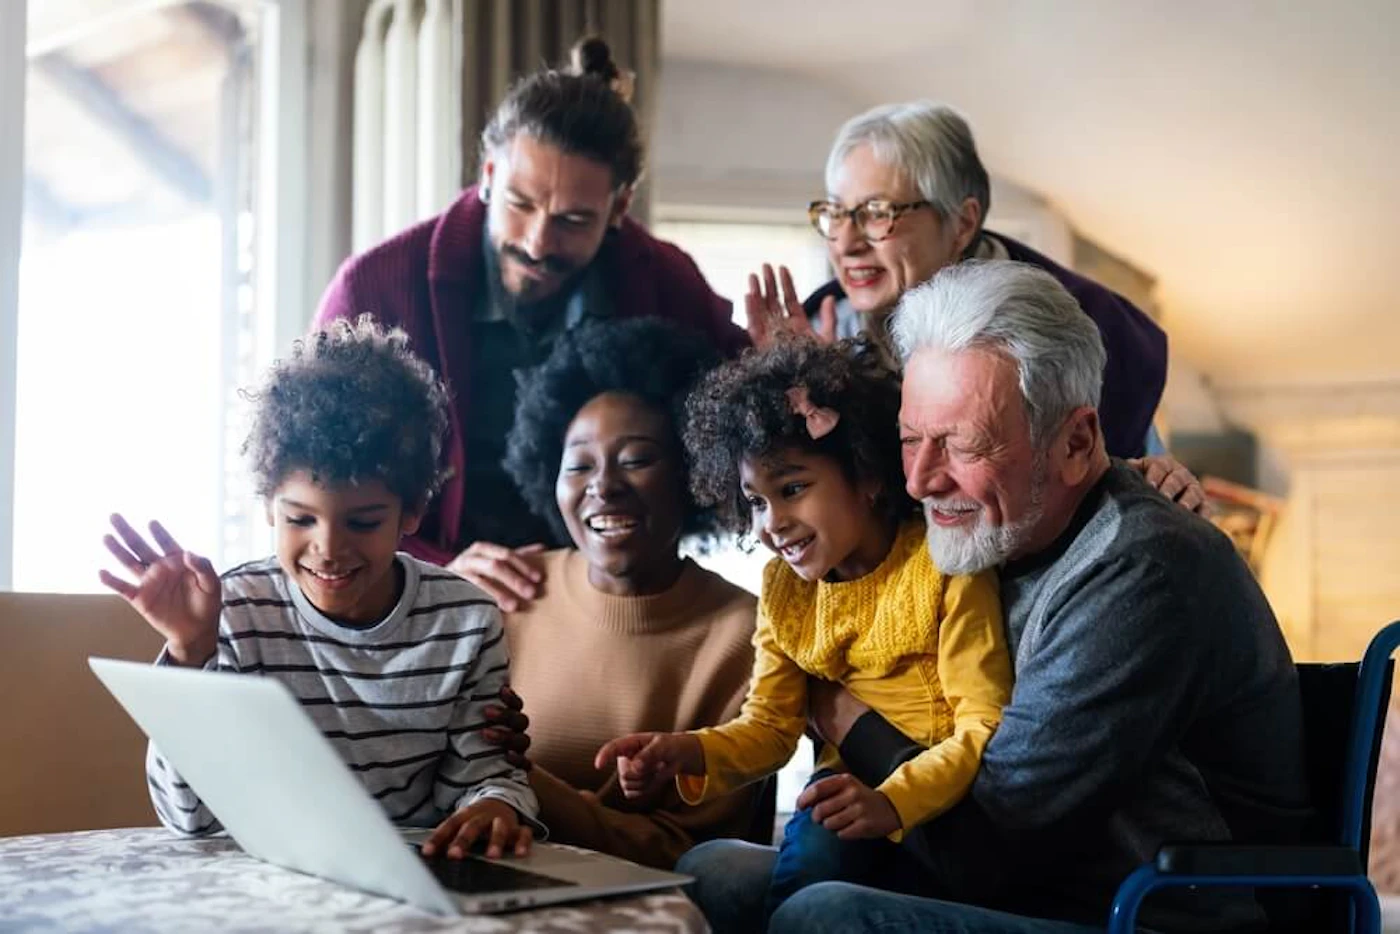 This funding’s aim is to help connect the estimated 8.5 million families and small businesses nationwide that still haven’t been able to access the full capabilities of modern technology. (Photo via Shutterstock)